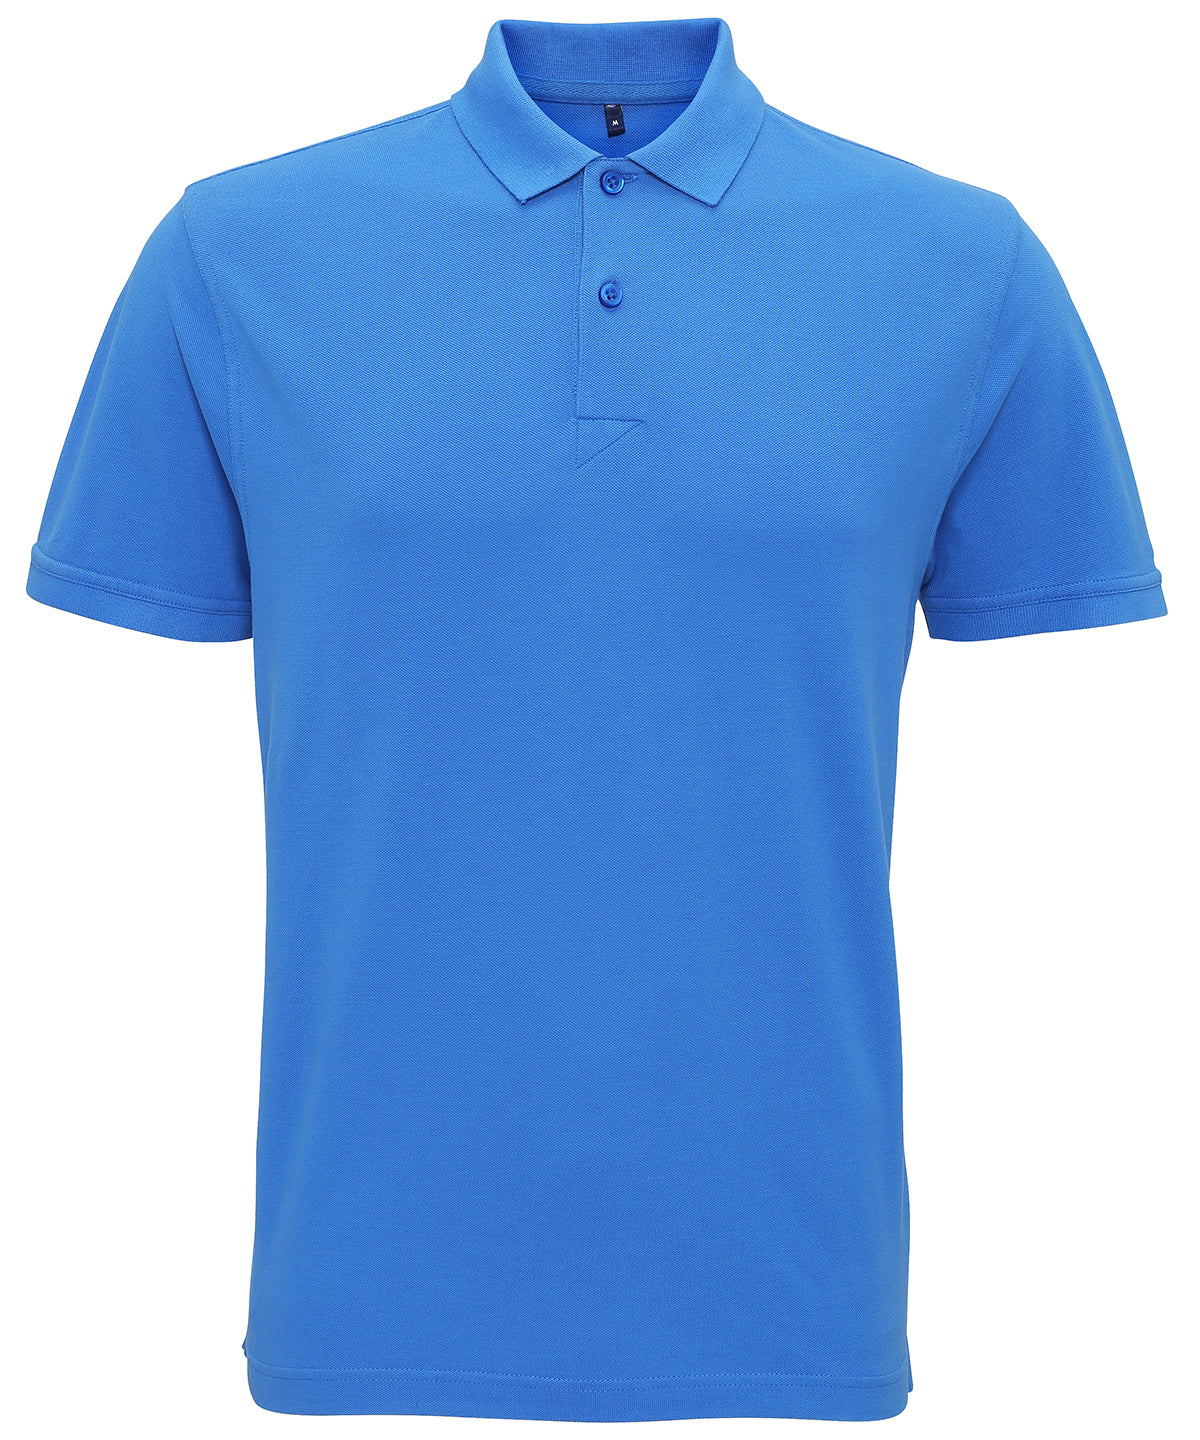 Personalised Polo Shirts - Turquoise Asquith & Fox Men's coastal vintage wash polo